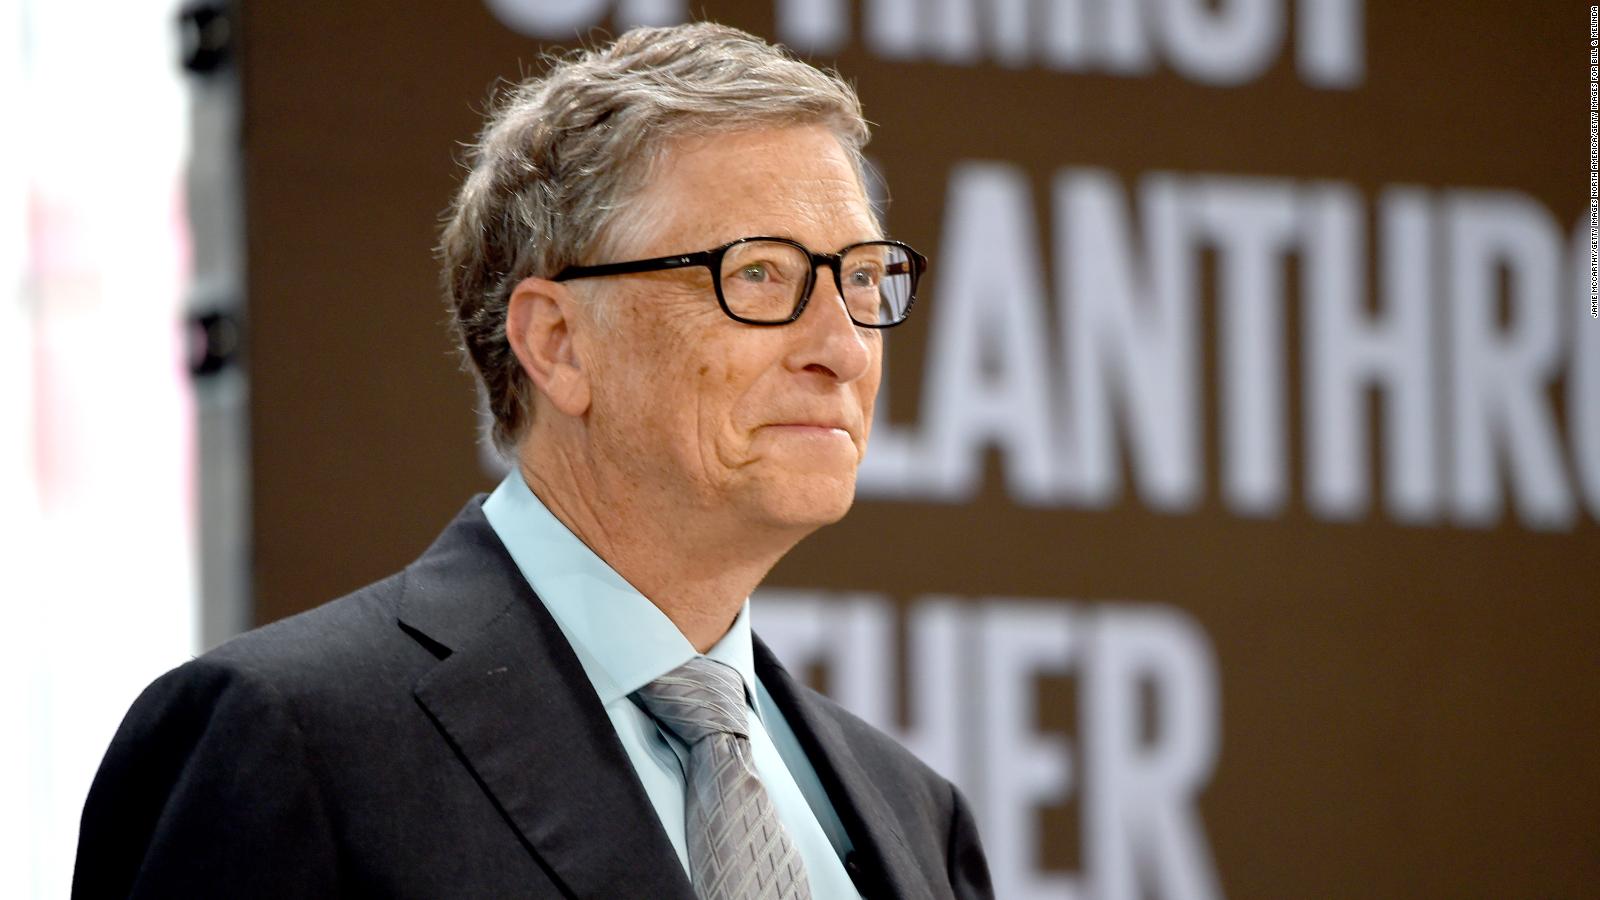 Bill Gates: Has poverty in the world been dramatically reduced?